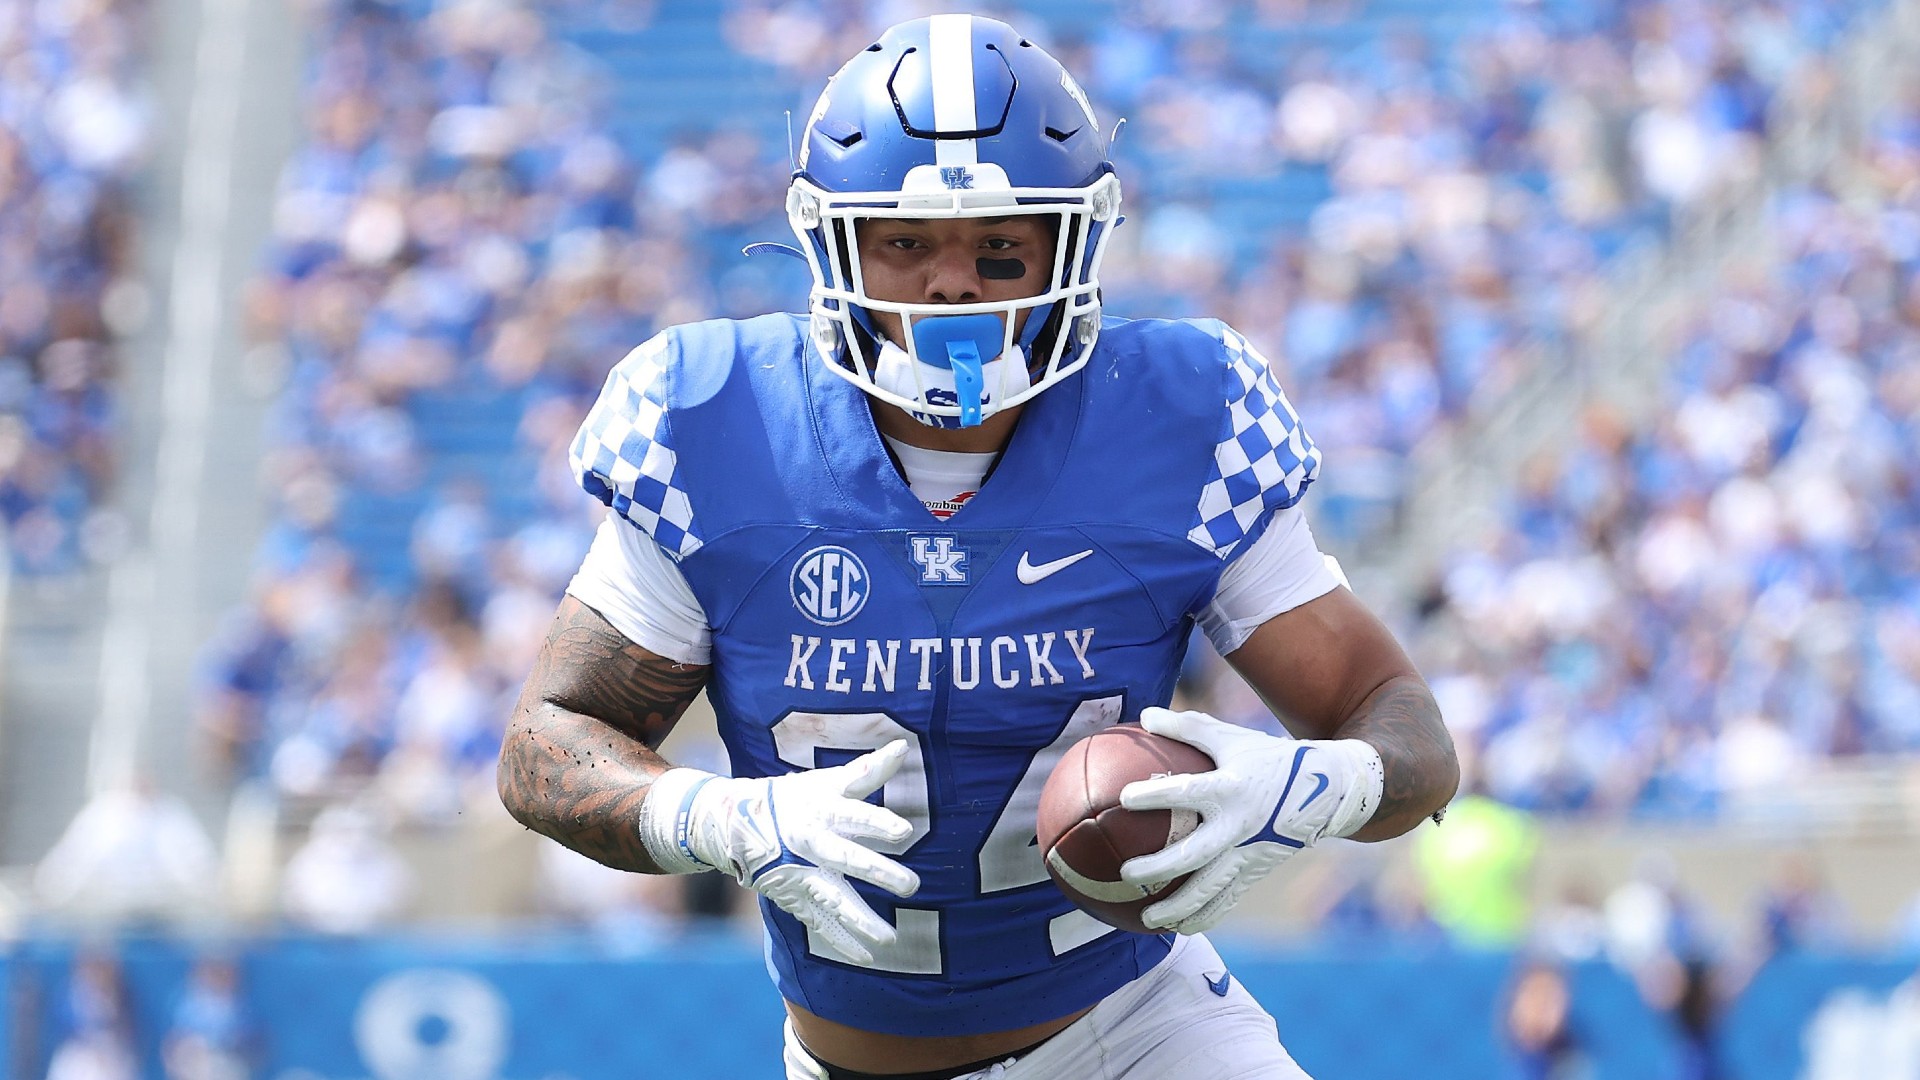 tab football betting results for kentucky